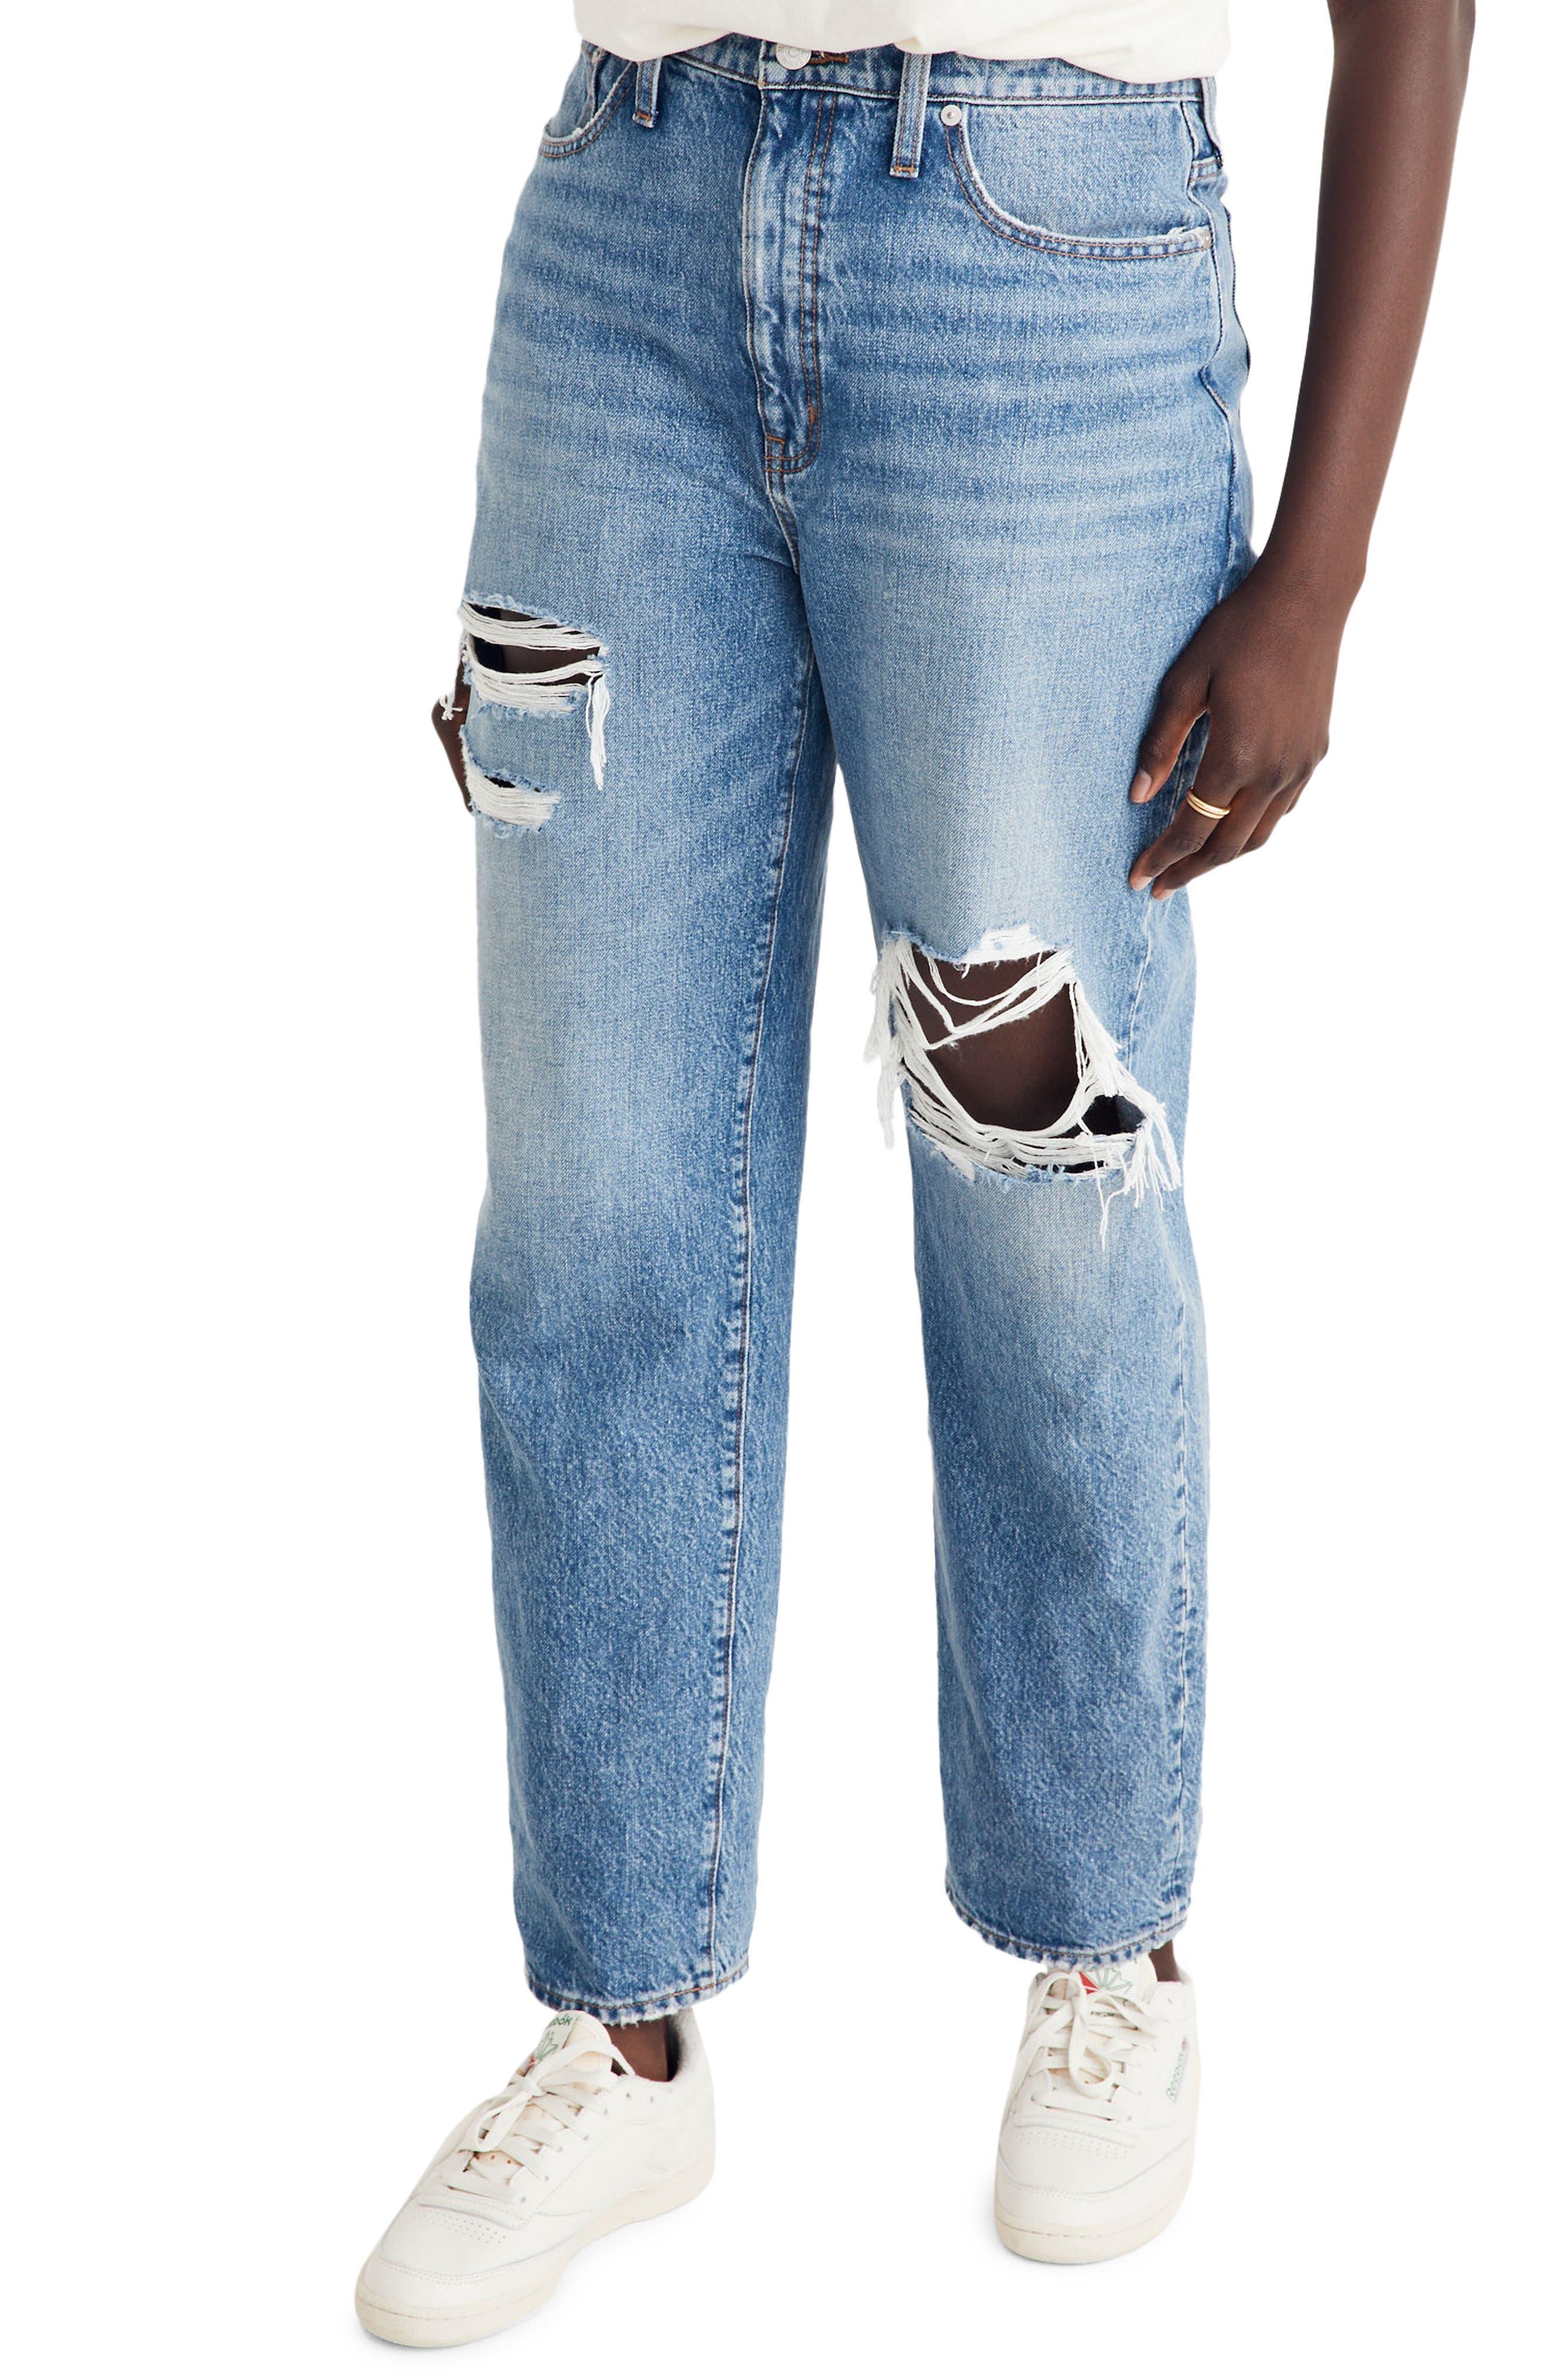 Madewell The Perfect Vintage Curvy Ripped High Waist Straight Leg Jeans